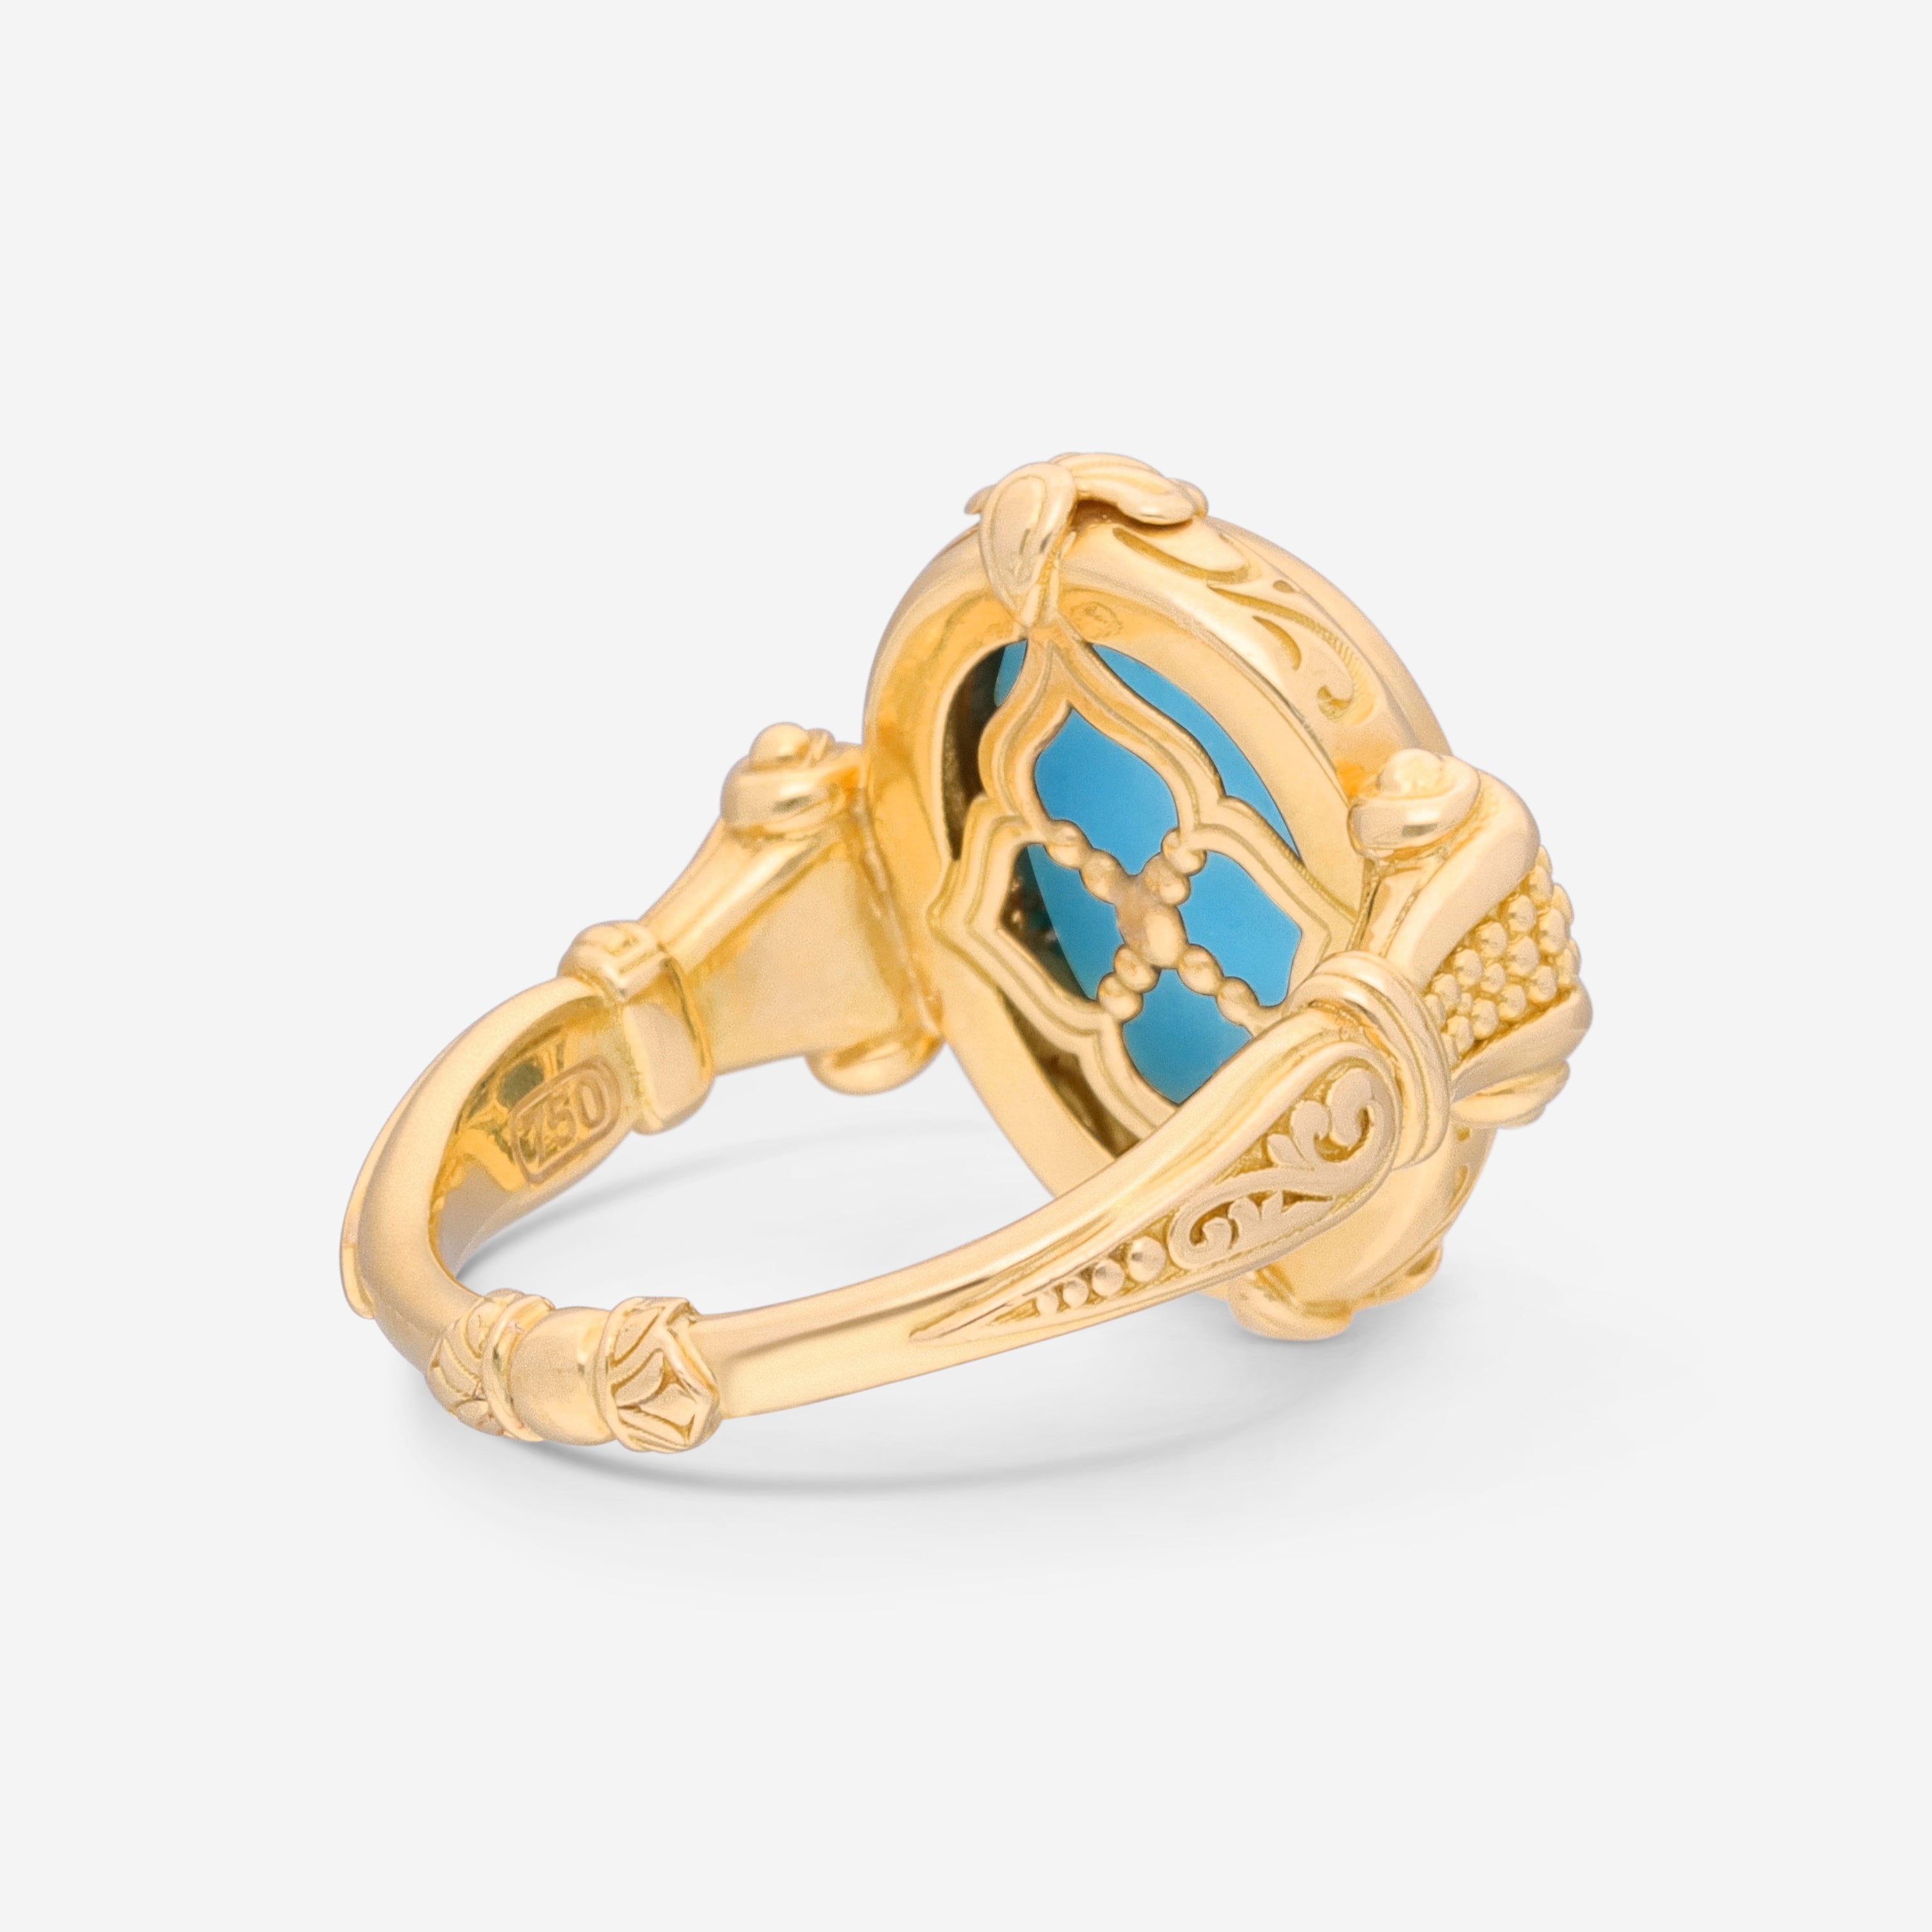 Konstantino Limited 18K Yellow Gold and Turquoise Statement Ring  DMK01123-18KT-137